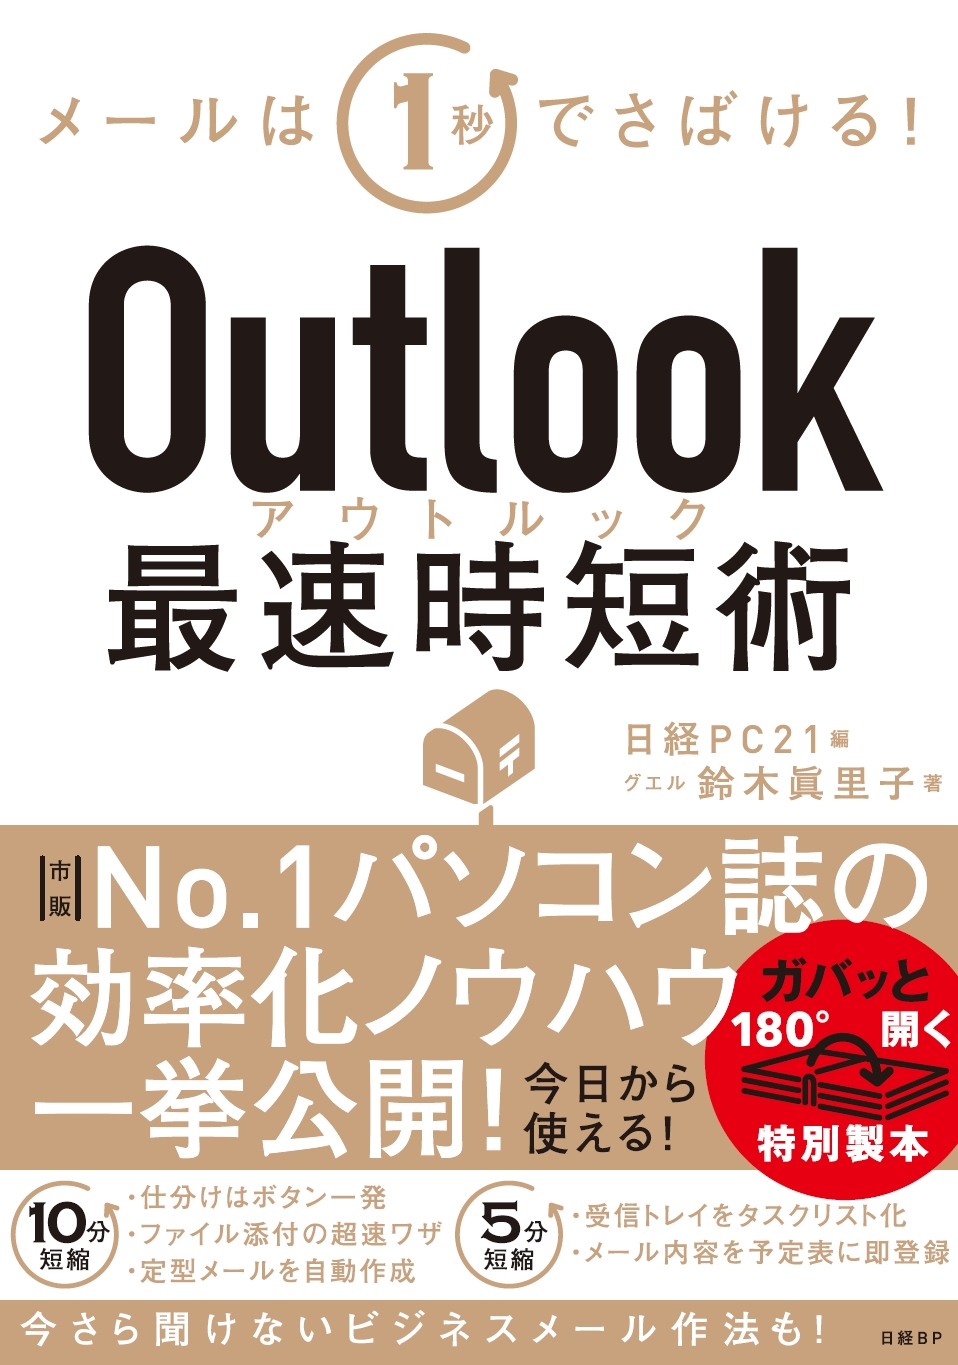 Outlook最速時短術の商品画像